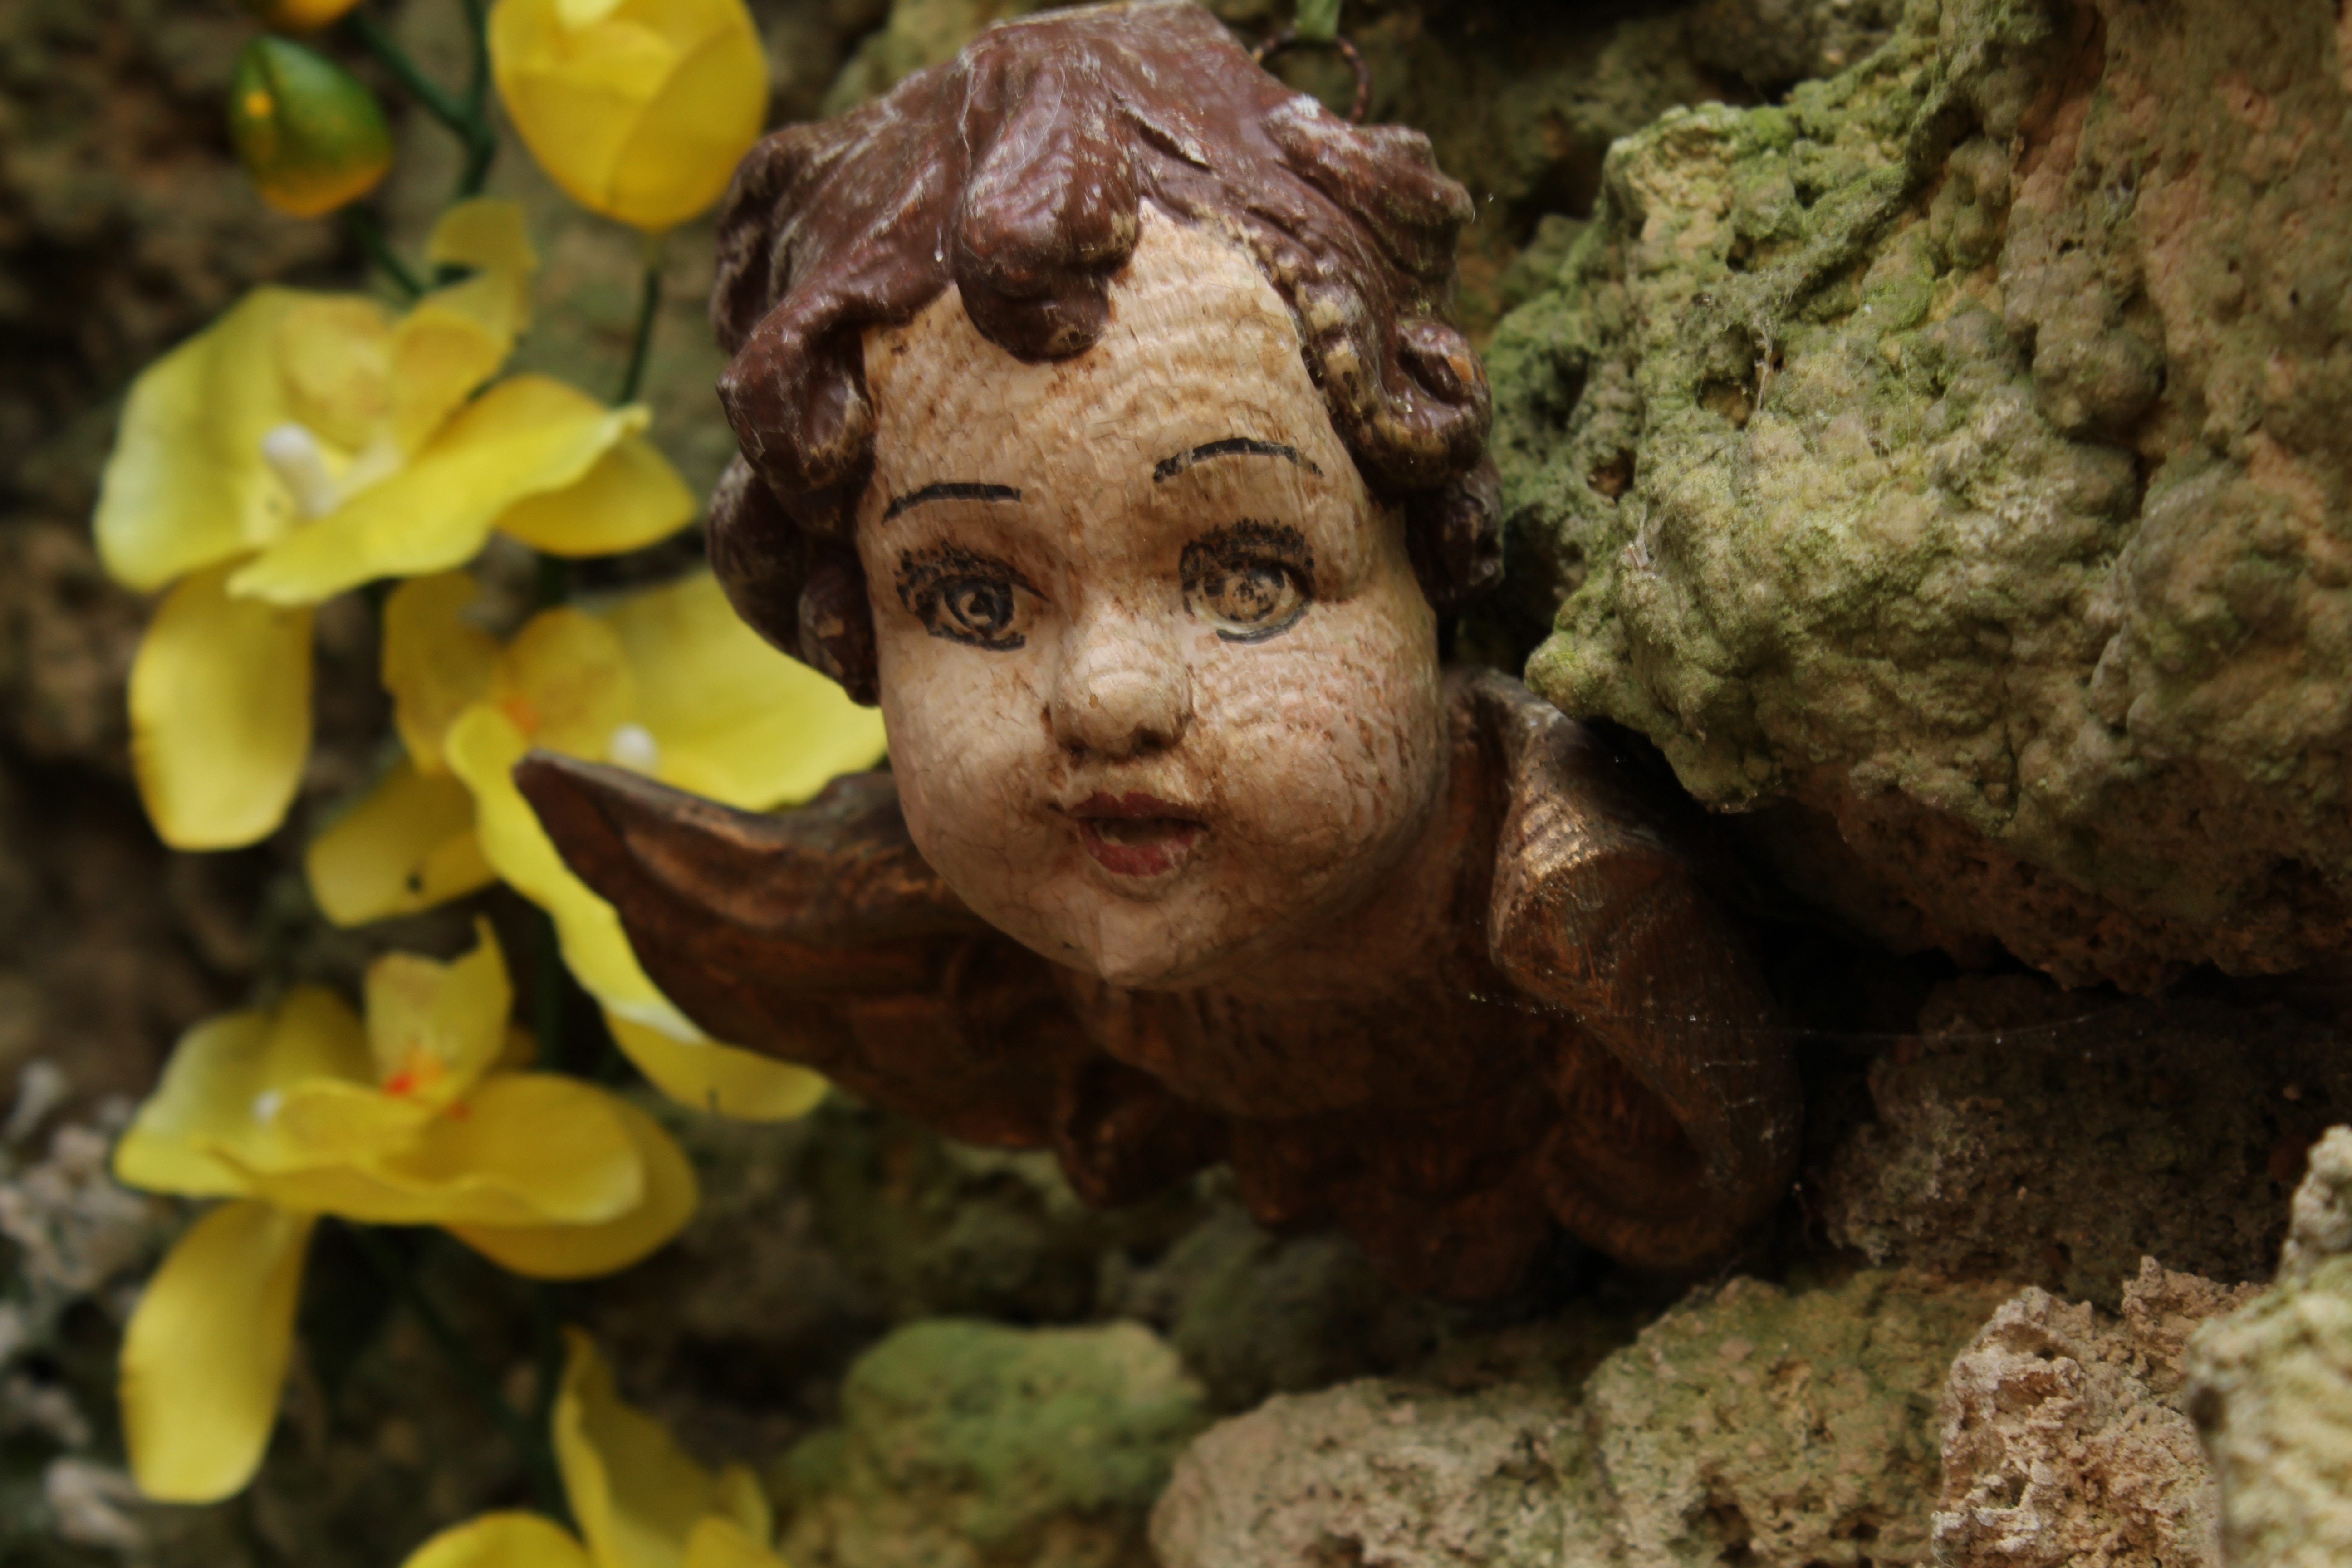 baby figurine and yellow petaled flower